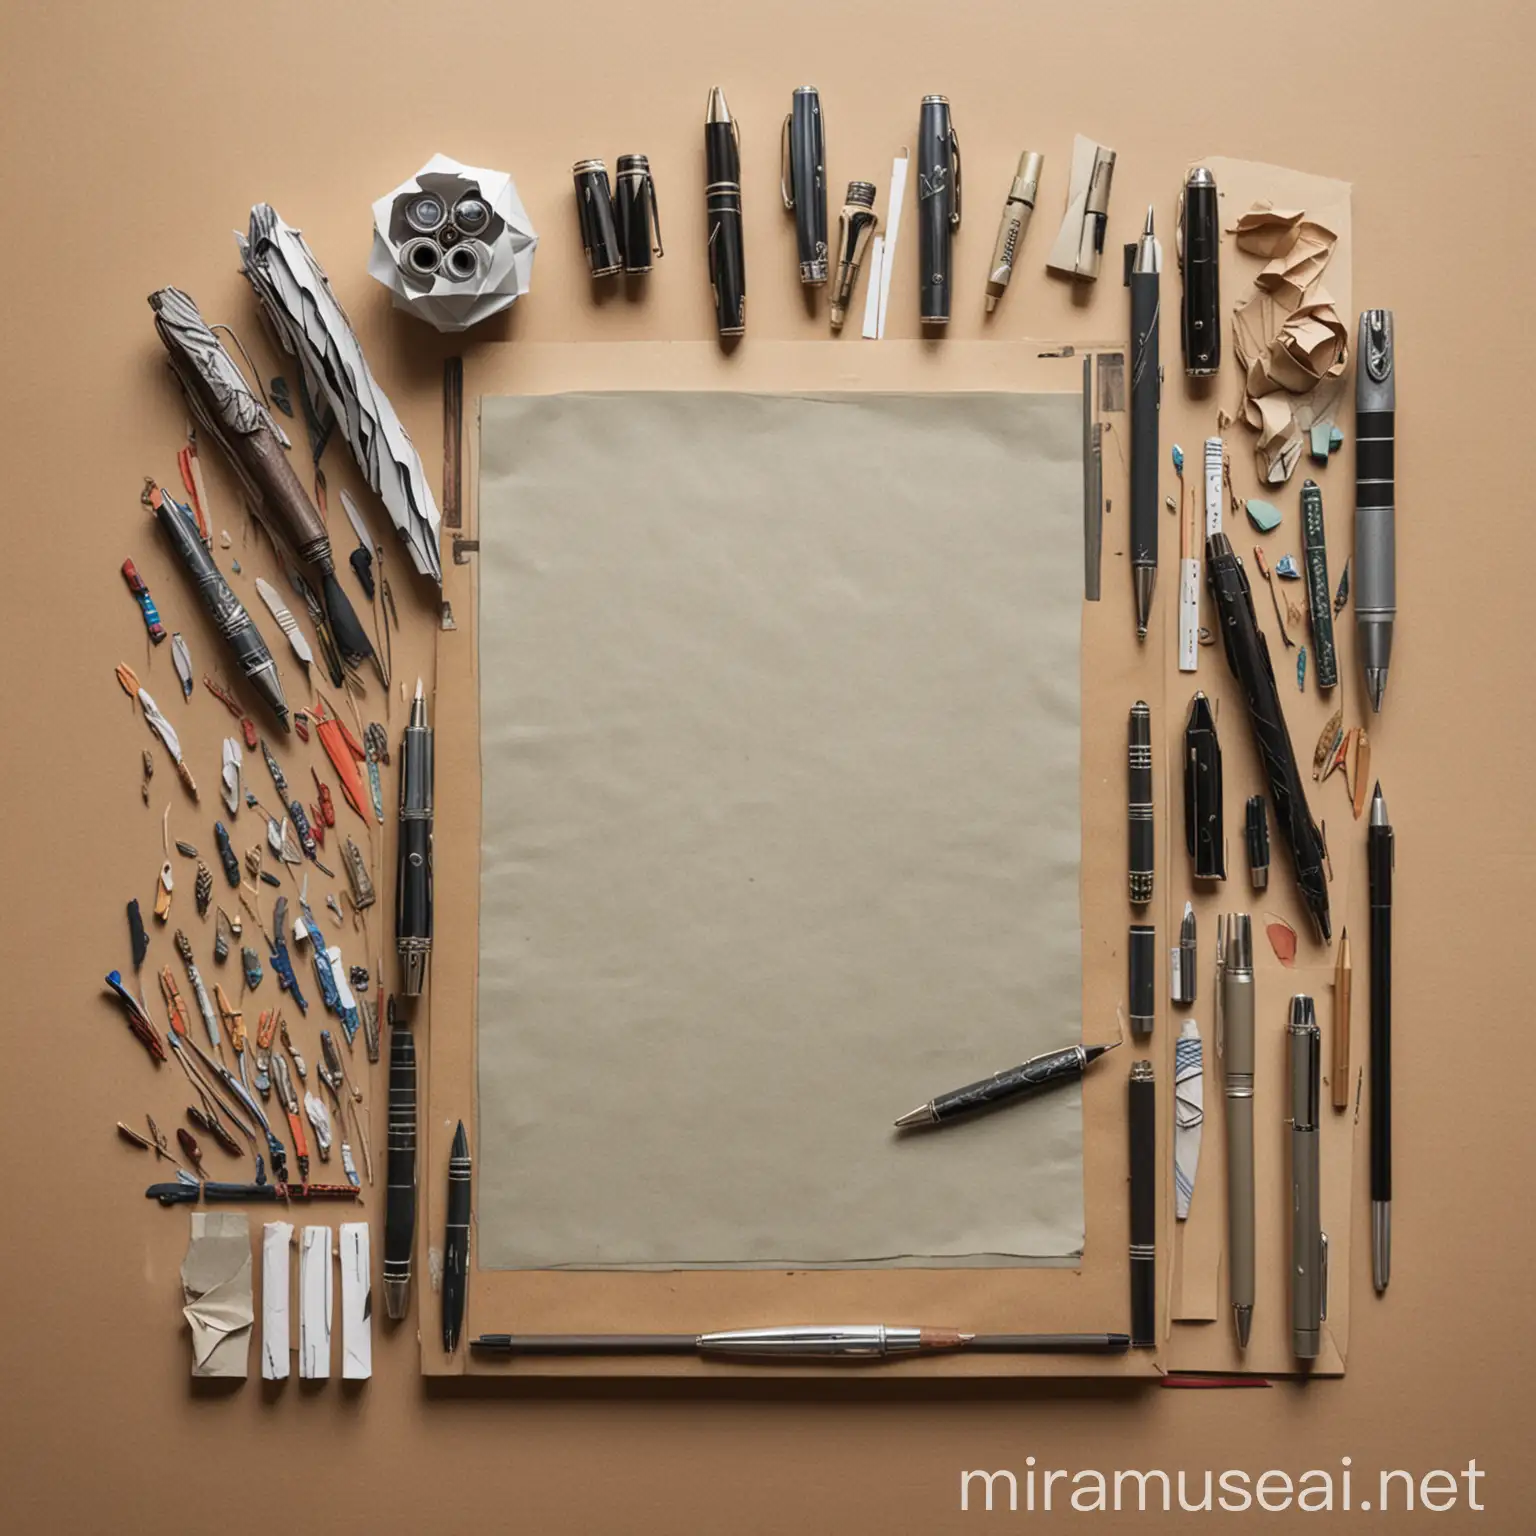 generate an artistic image of multiple pens and different kinds of paper on a table, clearly a worktable from an artist